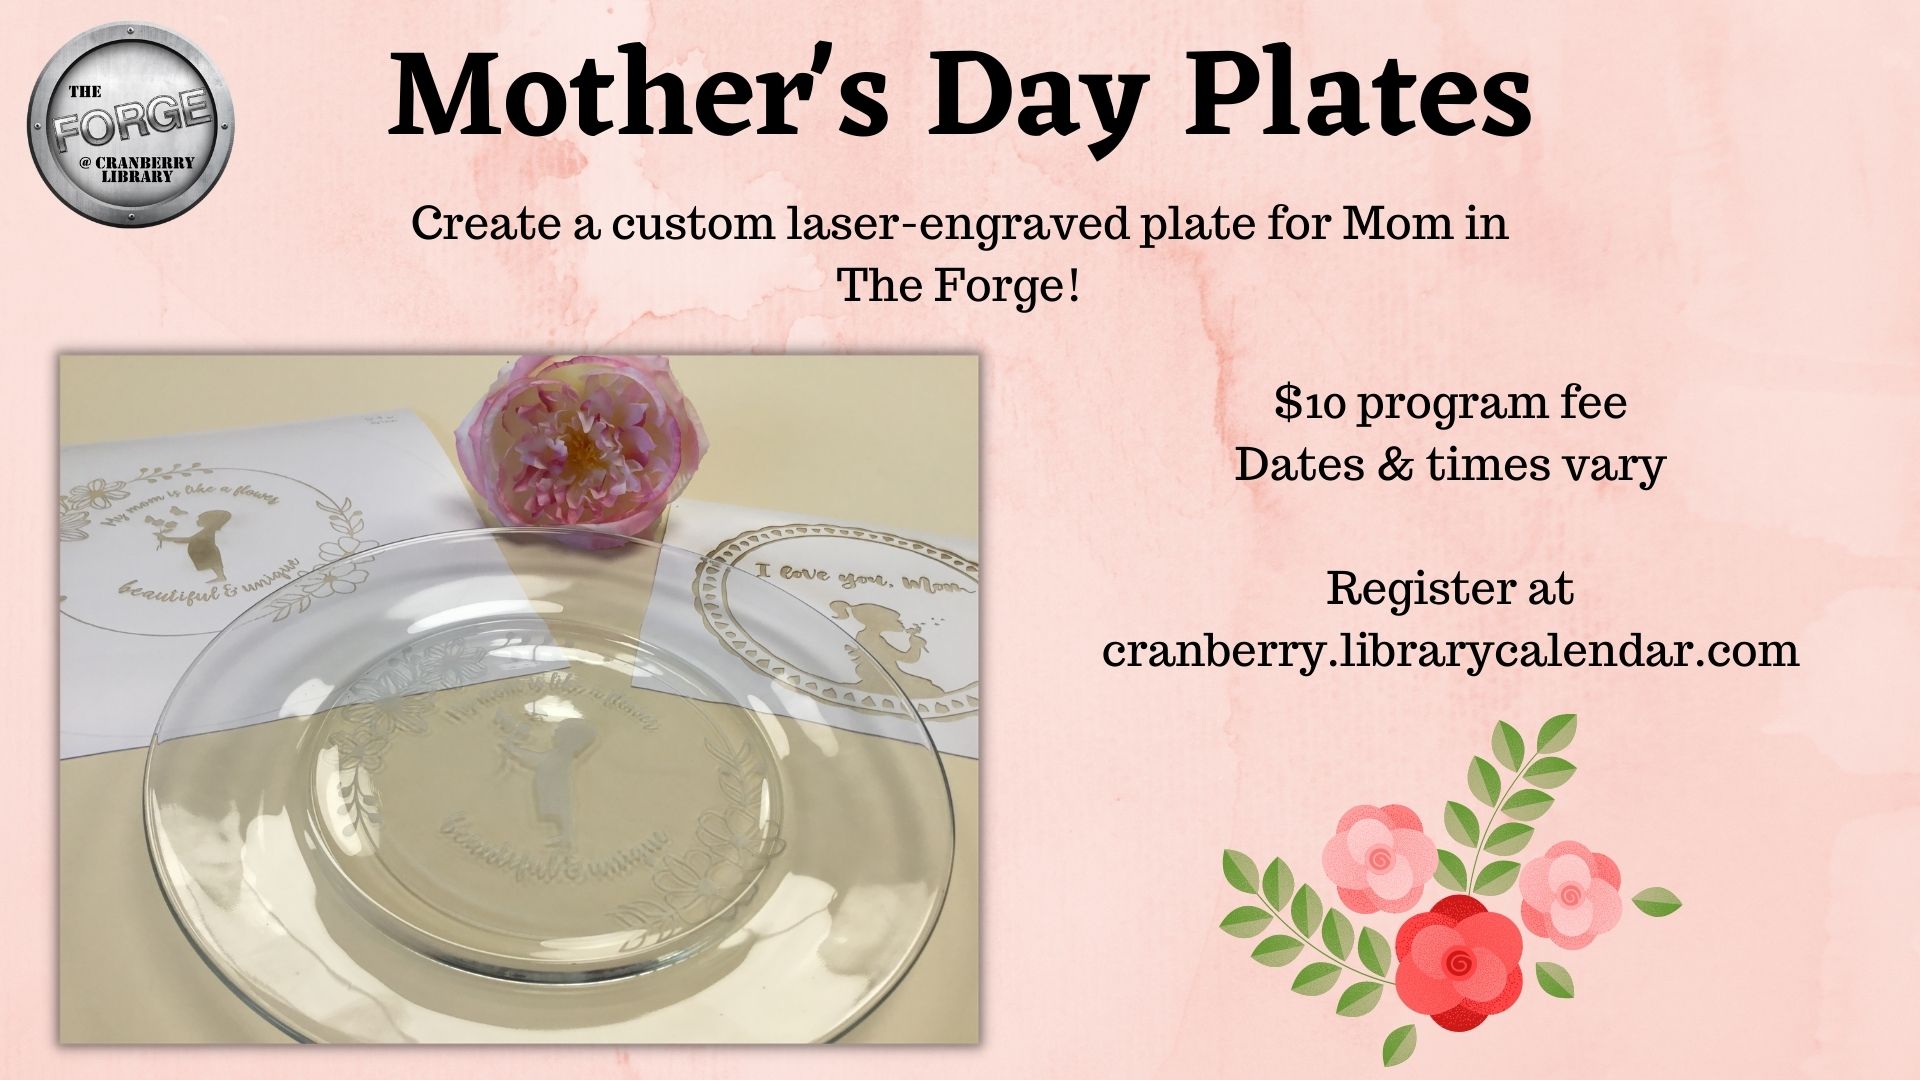 Flyer for Mother's Day Plates program